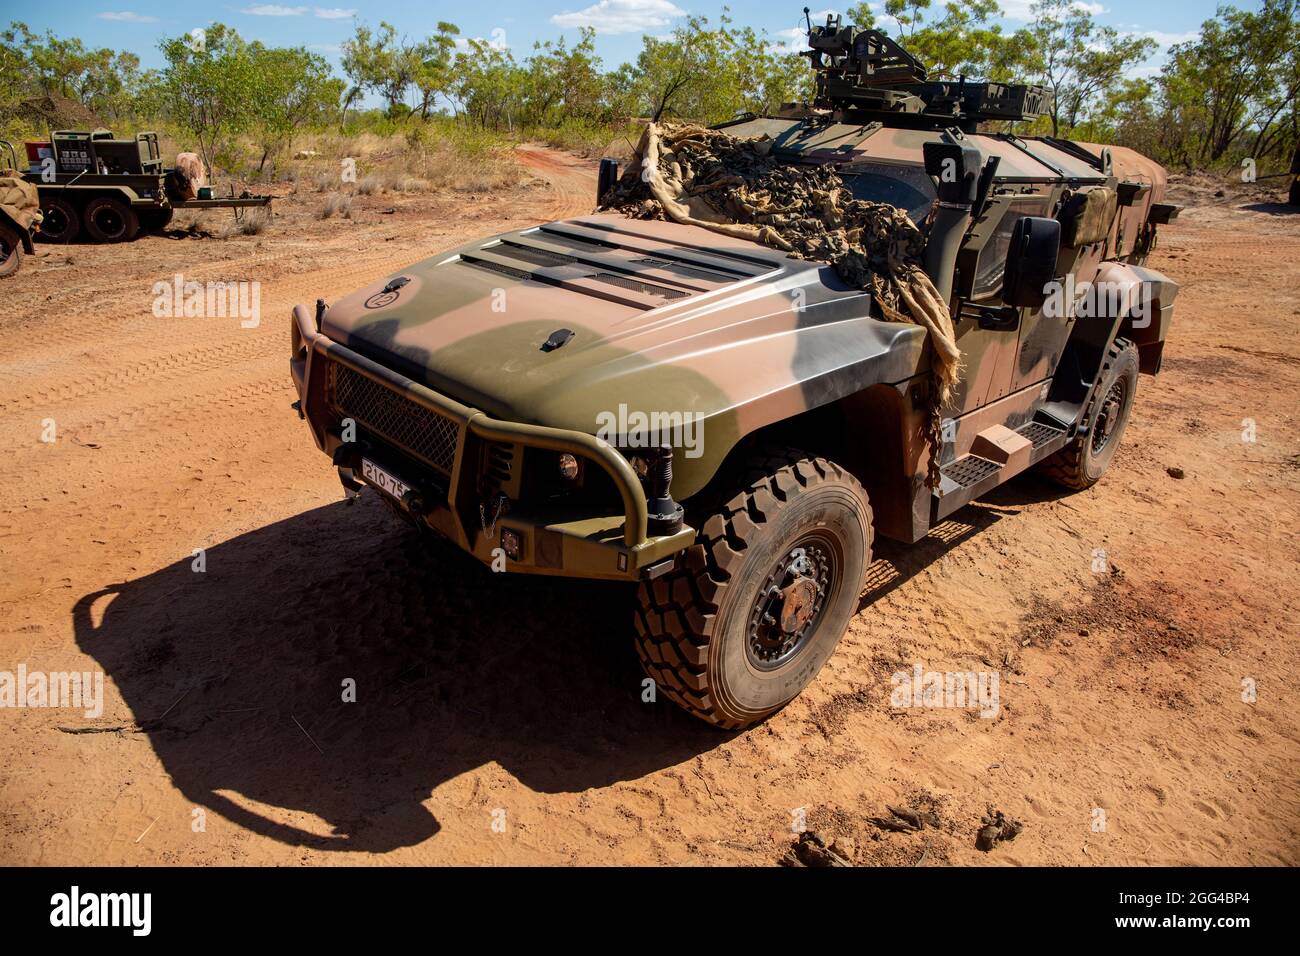 An Australian Army Protected Mobility Vehicle – Light is staged during Exercise Koolendong at Bradshaw Field Training Area, NT, Australia, Aug. 21, 2021. The PMV-L was born into service in 2020. Exercises like Koolendong validate MRF-D’s and the Australian Defence Force’s ability to conduct expeditionary advanced base operations with combined innovative capabilities and through their shared commitment, ready to respond to a crisis or contingency in the Indo-Pacific region. (U.S. Marine Corps photo by Cpl. Jacob Foster) Stock Photo